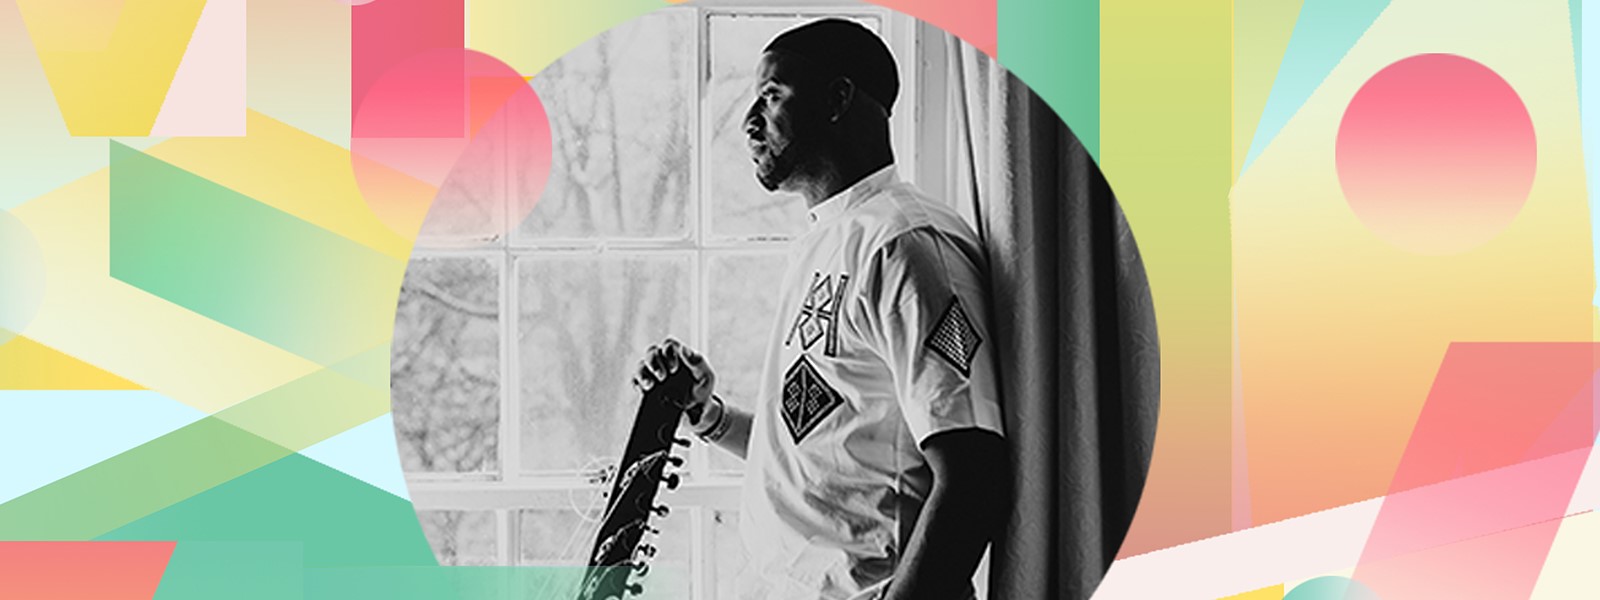 Seckou Keita stands on a pink and yellow background with his kora